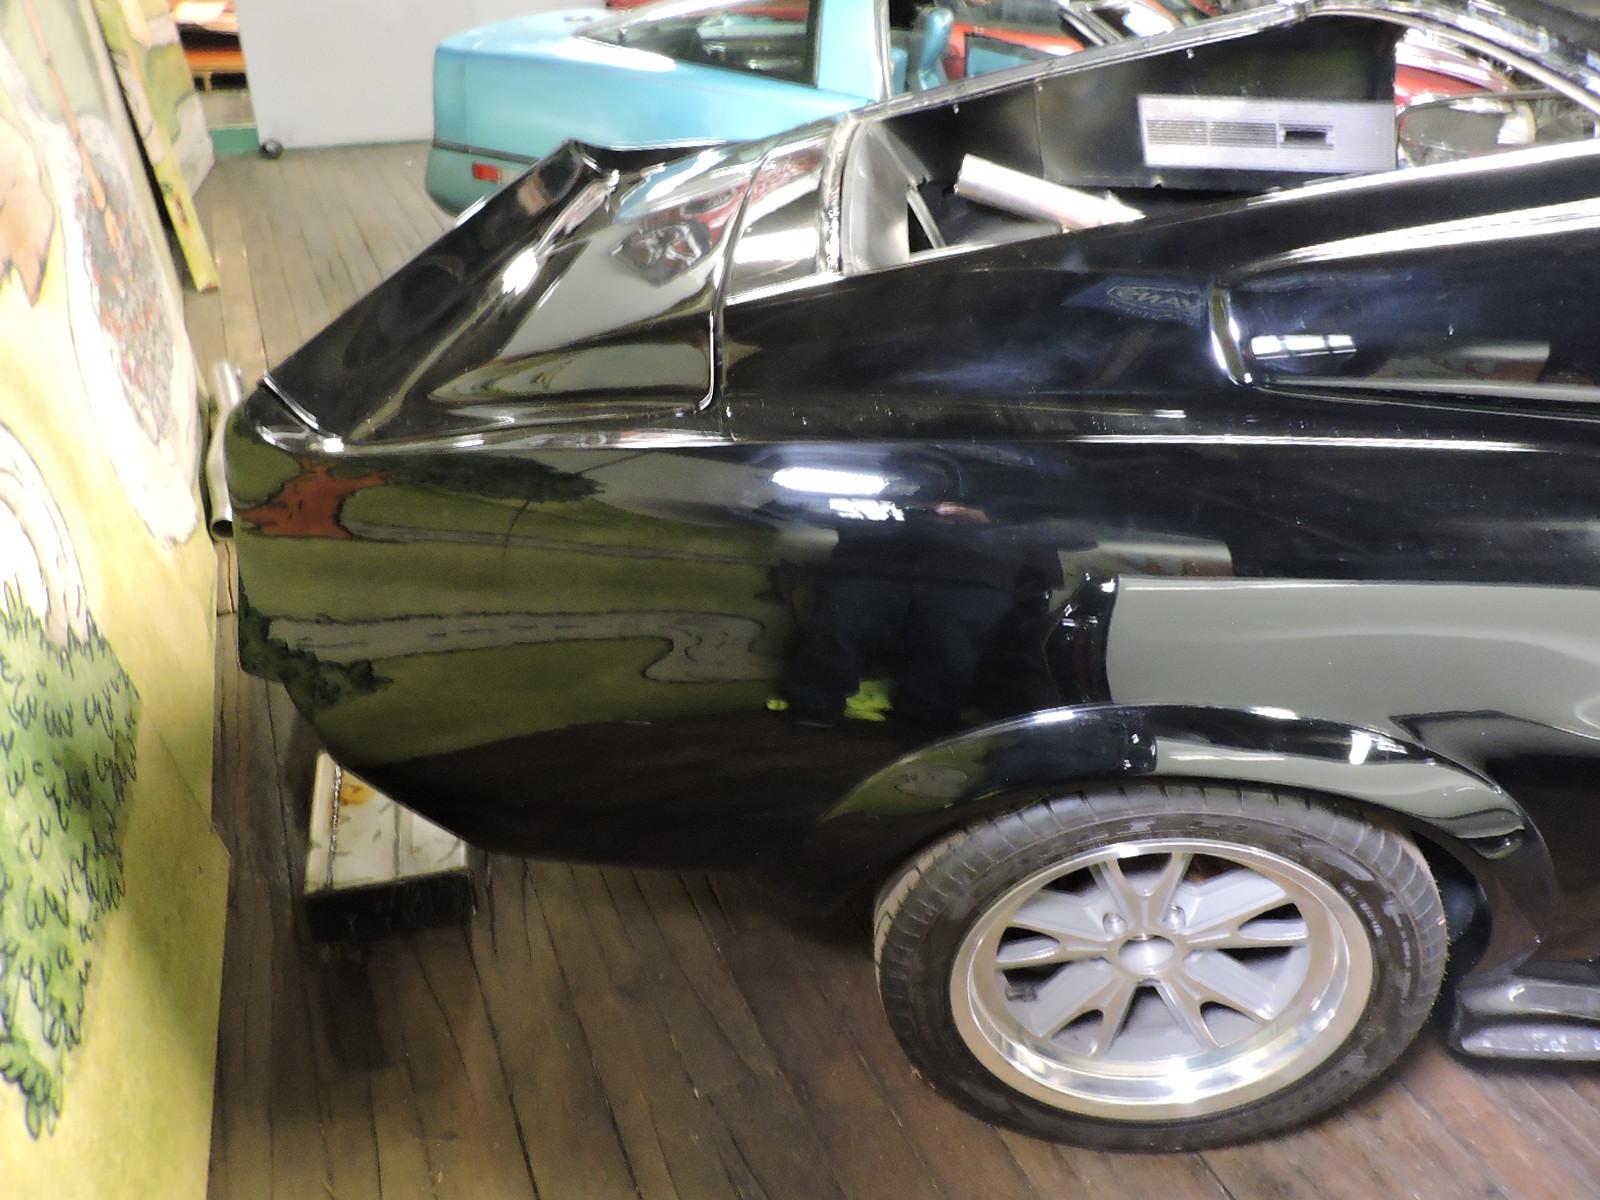 Modified "Eleanor" Tribute - 1968 Ford Mustang Fastback - 85% Complete Project